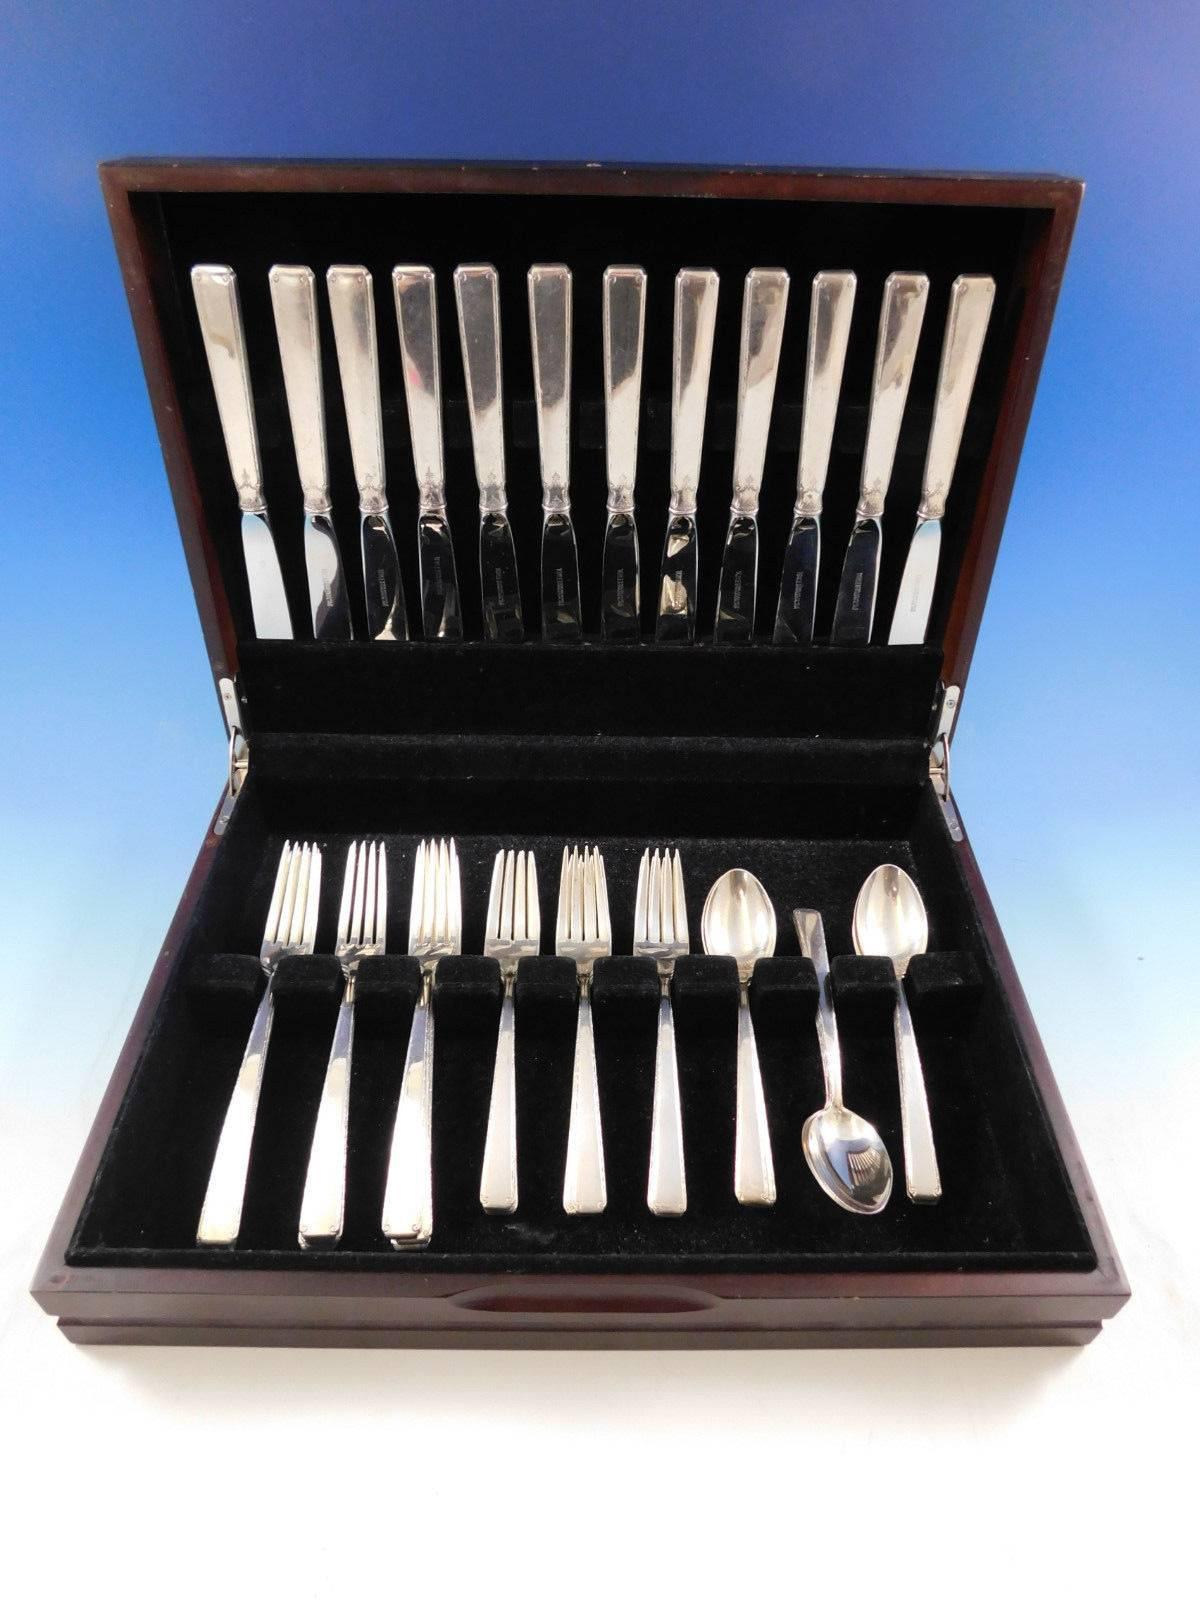 Old Lace by Towle Sterling Silver Flatware set - 48 pieces. This set includes: 

12 Knives, 9